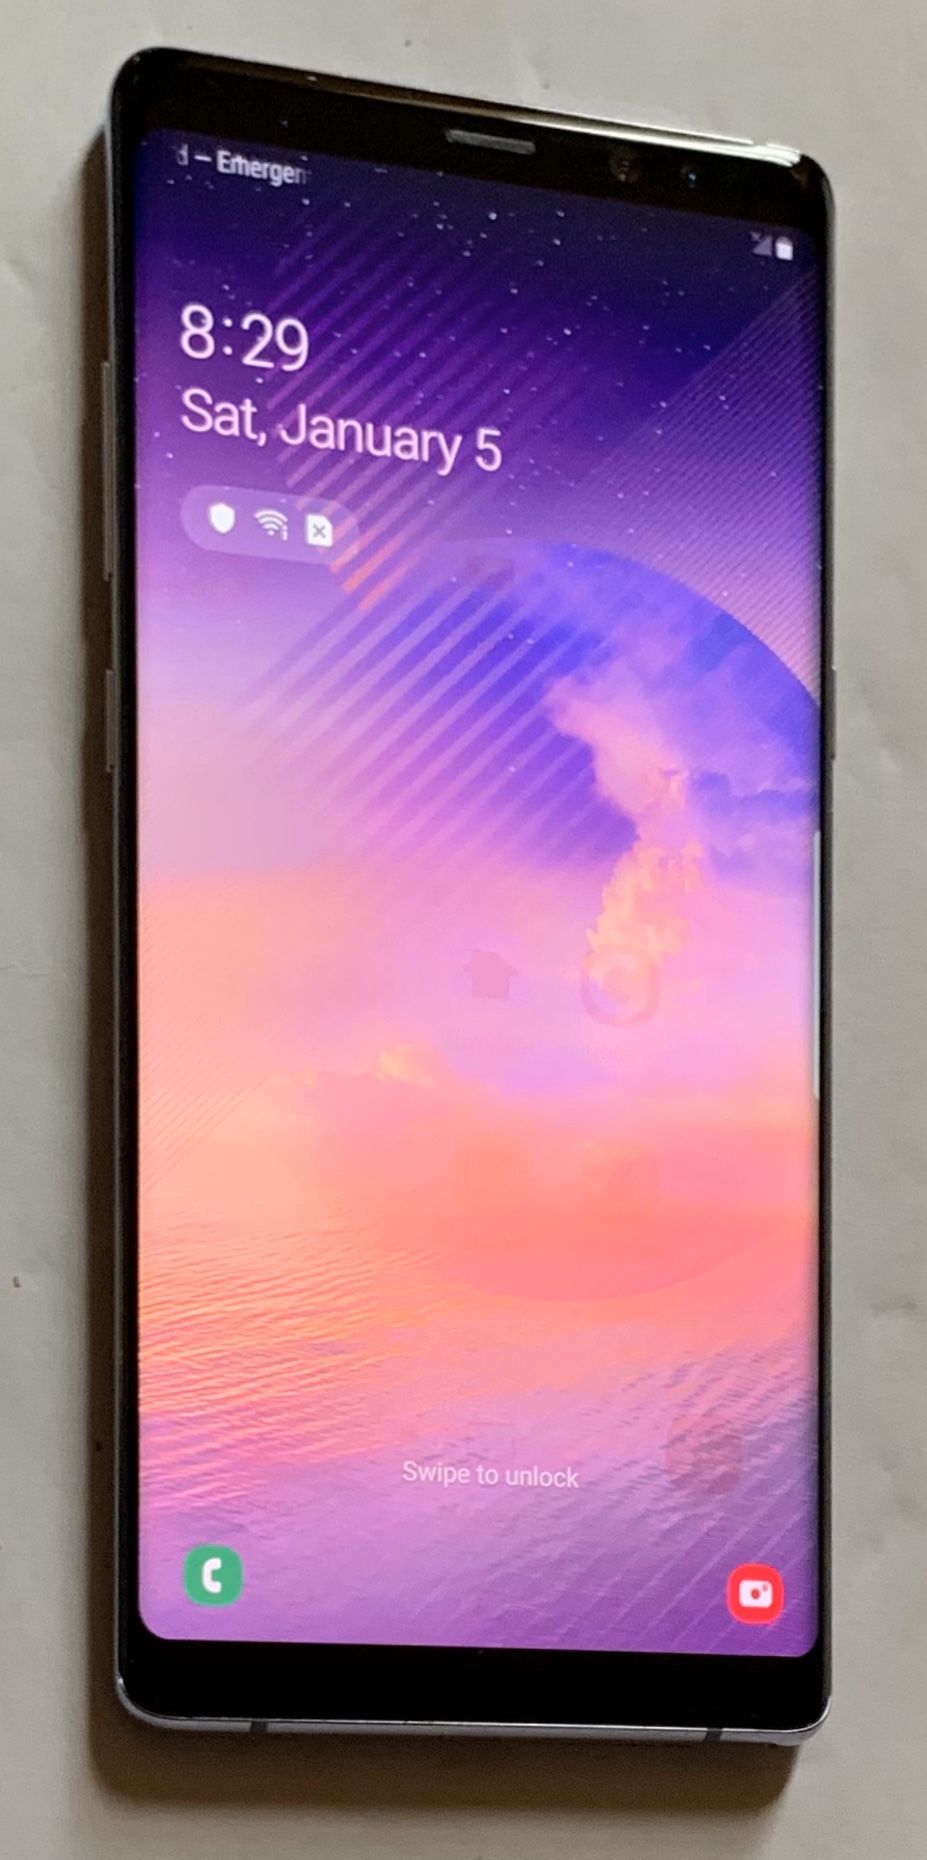 BLUE SAMSUNG GALAXY NOTE 8 - UNLOCKED FOR ANY CARRIER